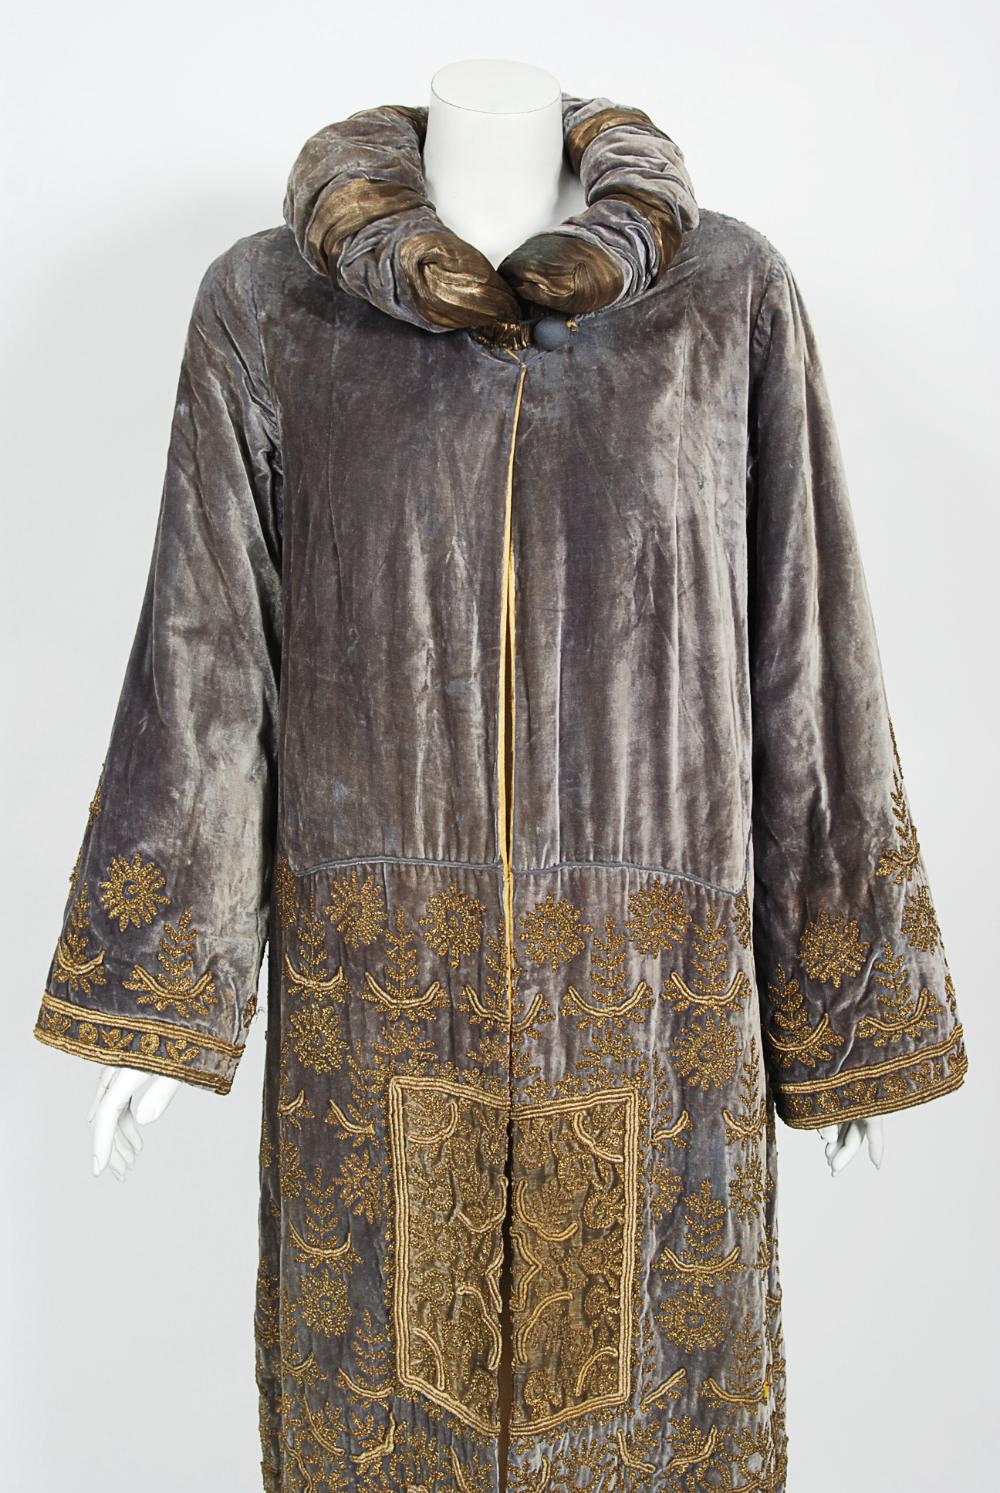 A truly breathtaking and museum quality Banani attributed metallic gold lamé embroidered velvet coat dating back to the 1928-29 time period. Babani, founded in Paris in 1894 by Vitaldi Babani, was a fashion house based on the Boulevard Haussmann